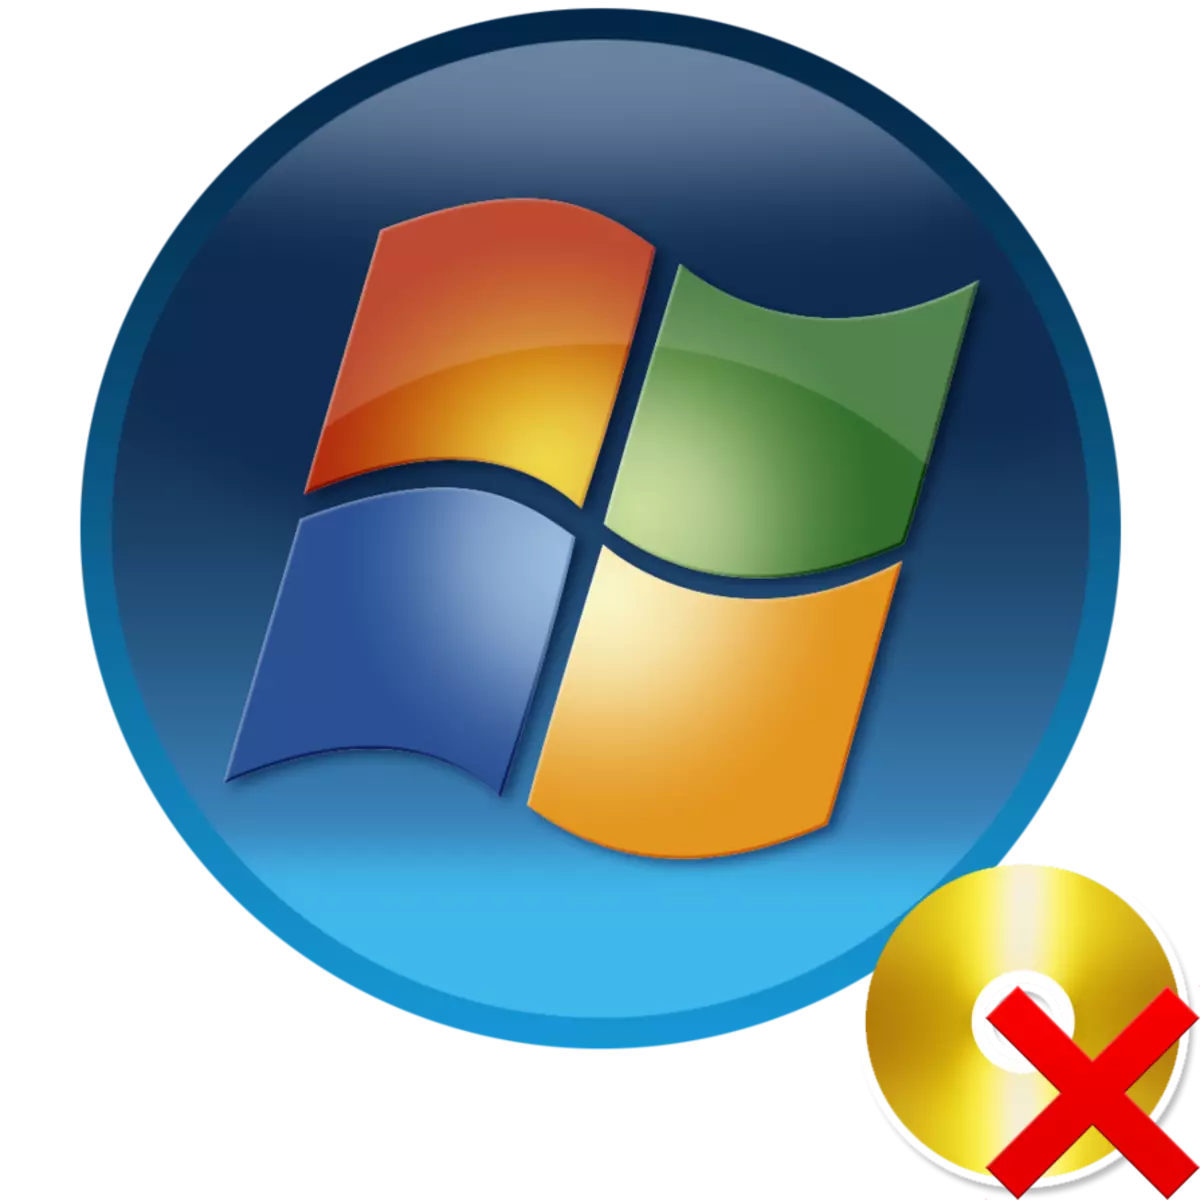 Deleting a virtual disk on a computer with Windows 7